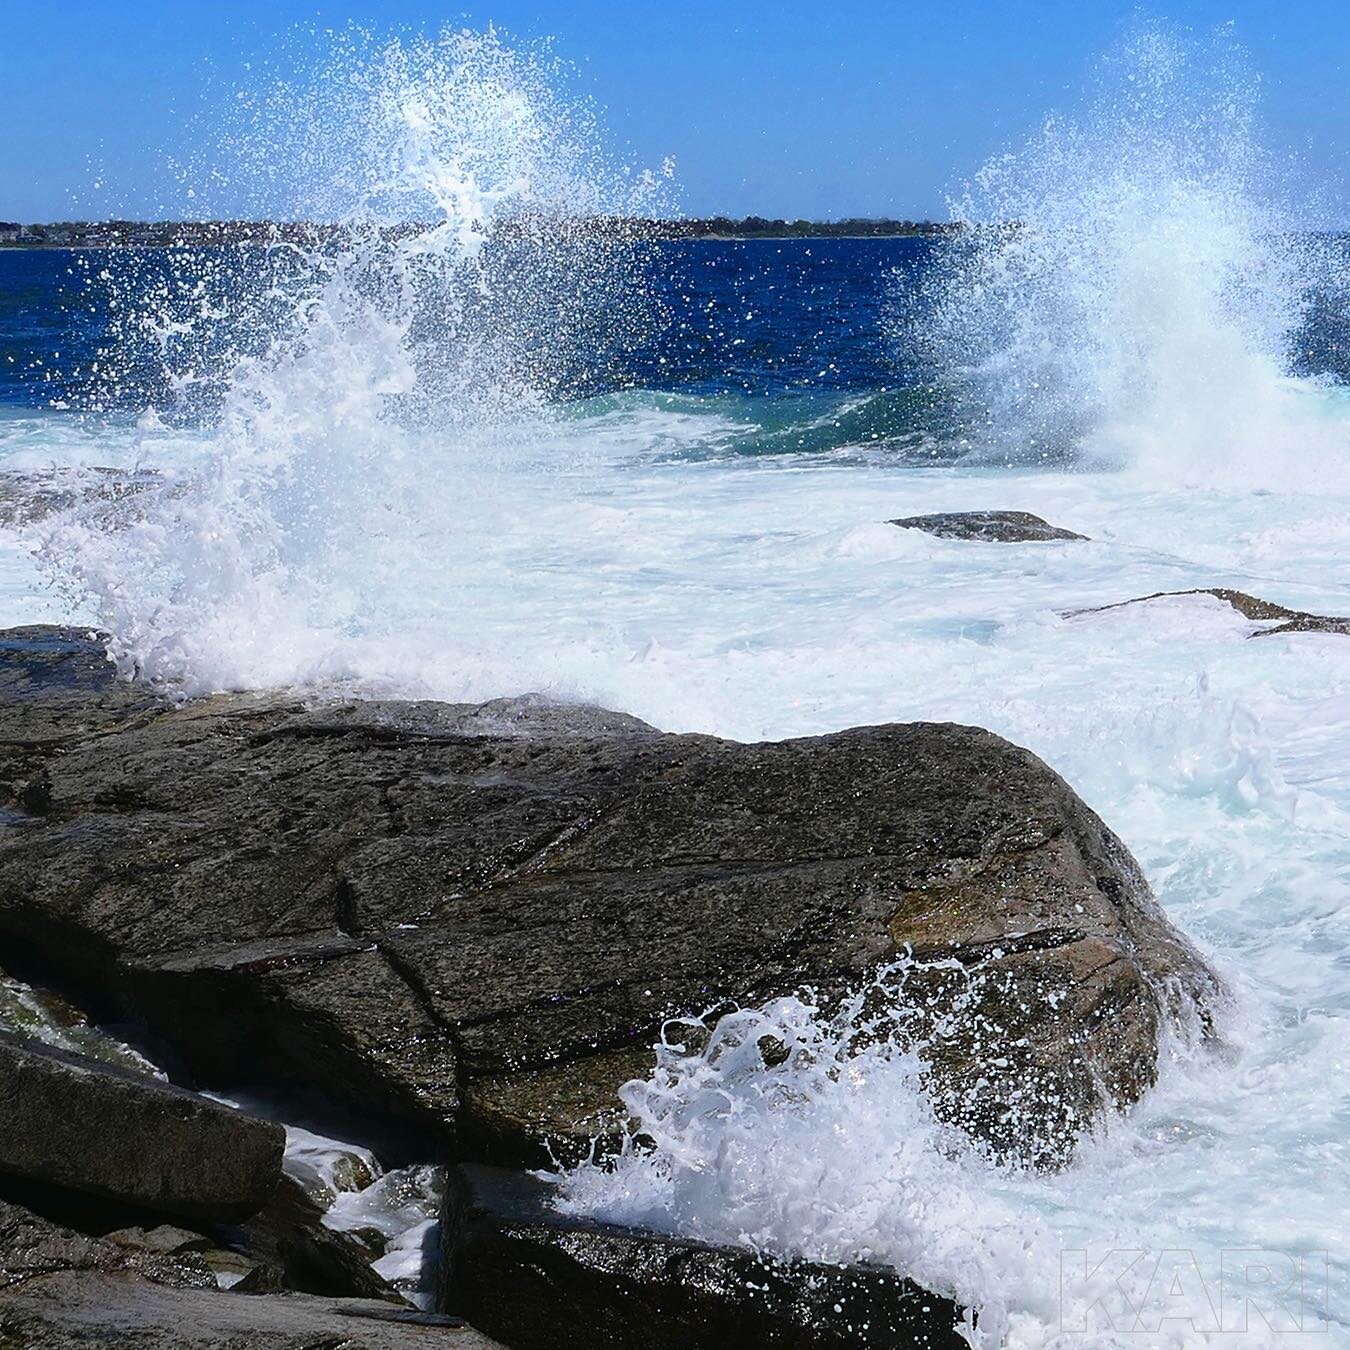 Sea spray as the waves crash against the lighthouse point rocks, as if the ocean is expressing joy through exuberant plumes. Momentary sculptures in mid-air. Wonderful.
 - Sondra
.
.
.
#seaplumes #oceanjoy #lighthousepoint #naturespower #photography 